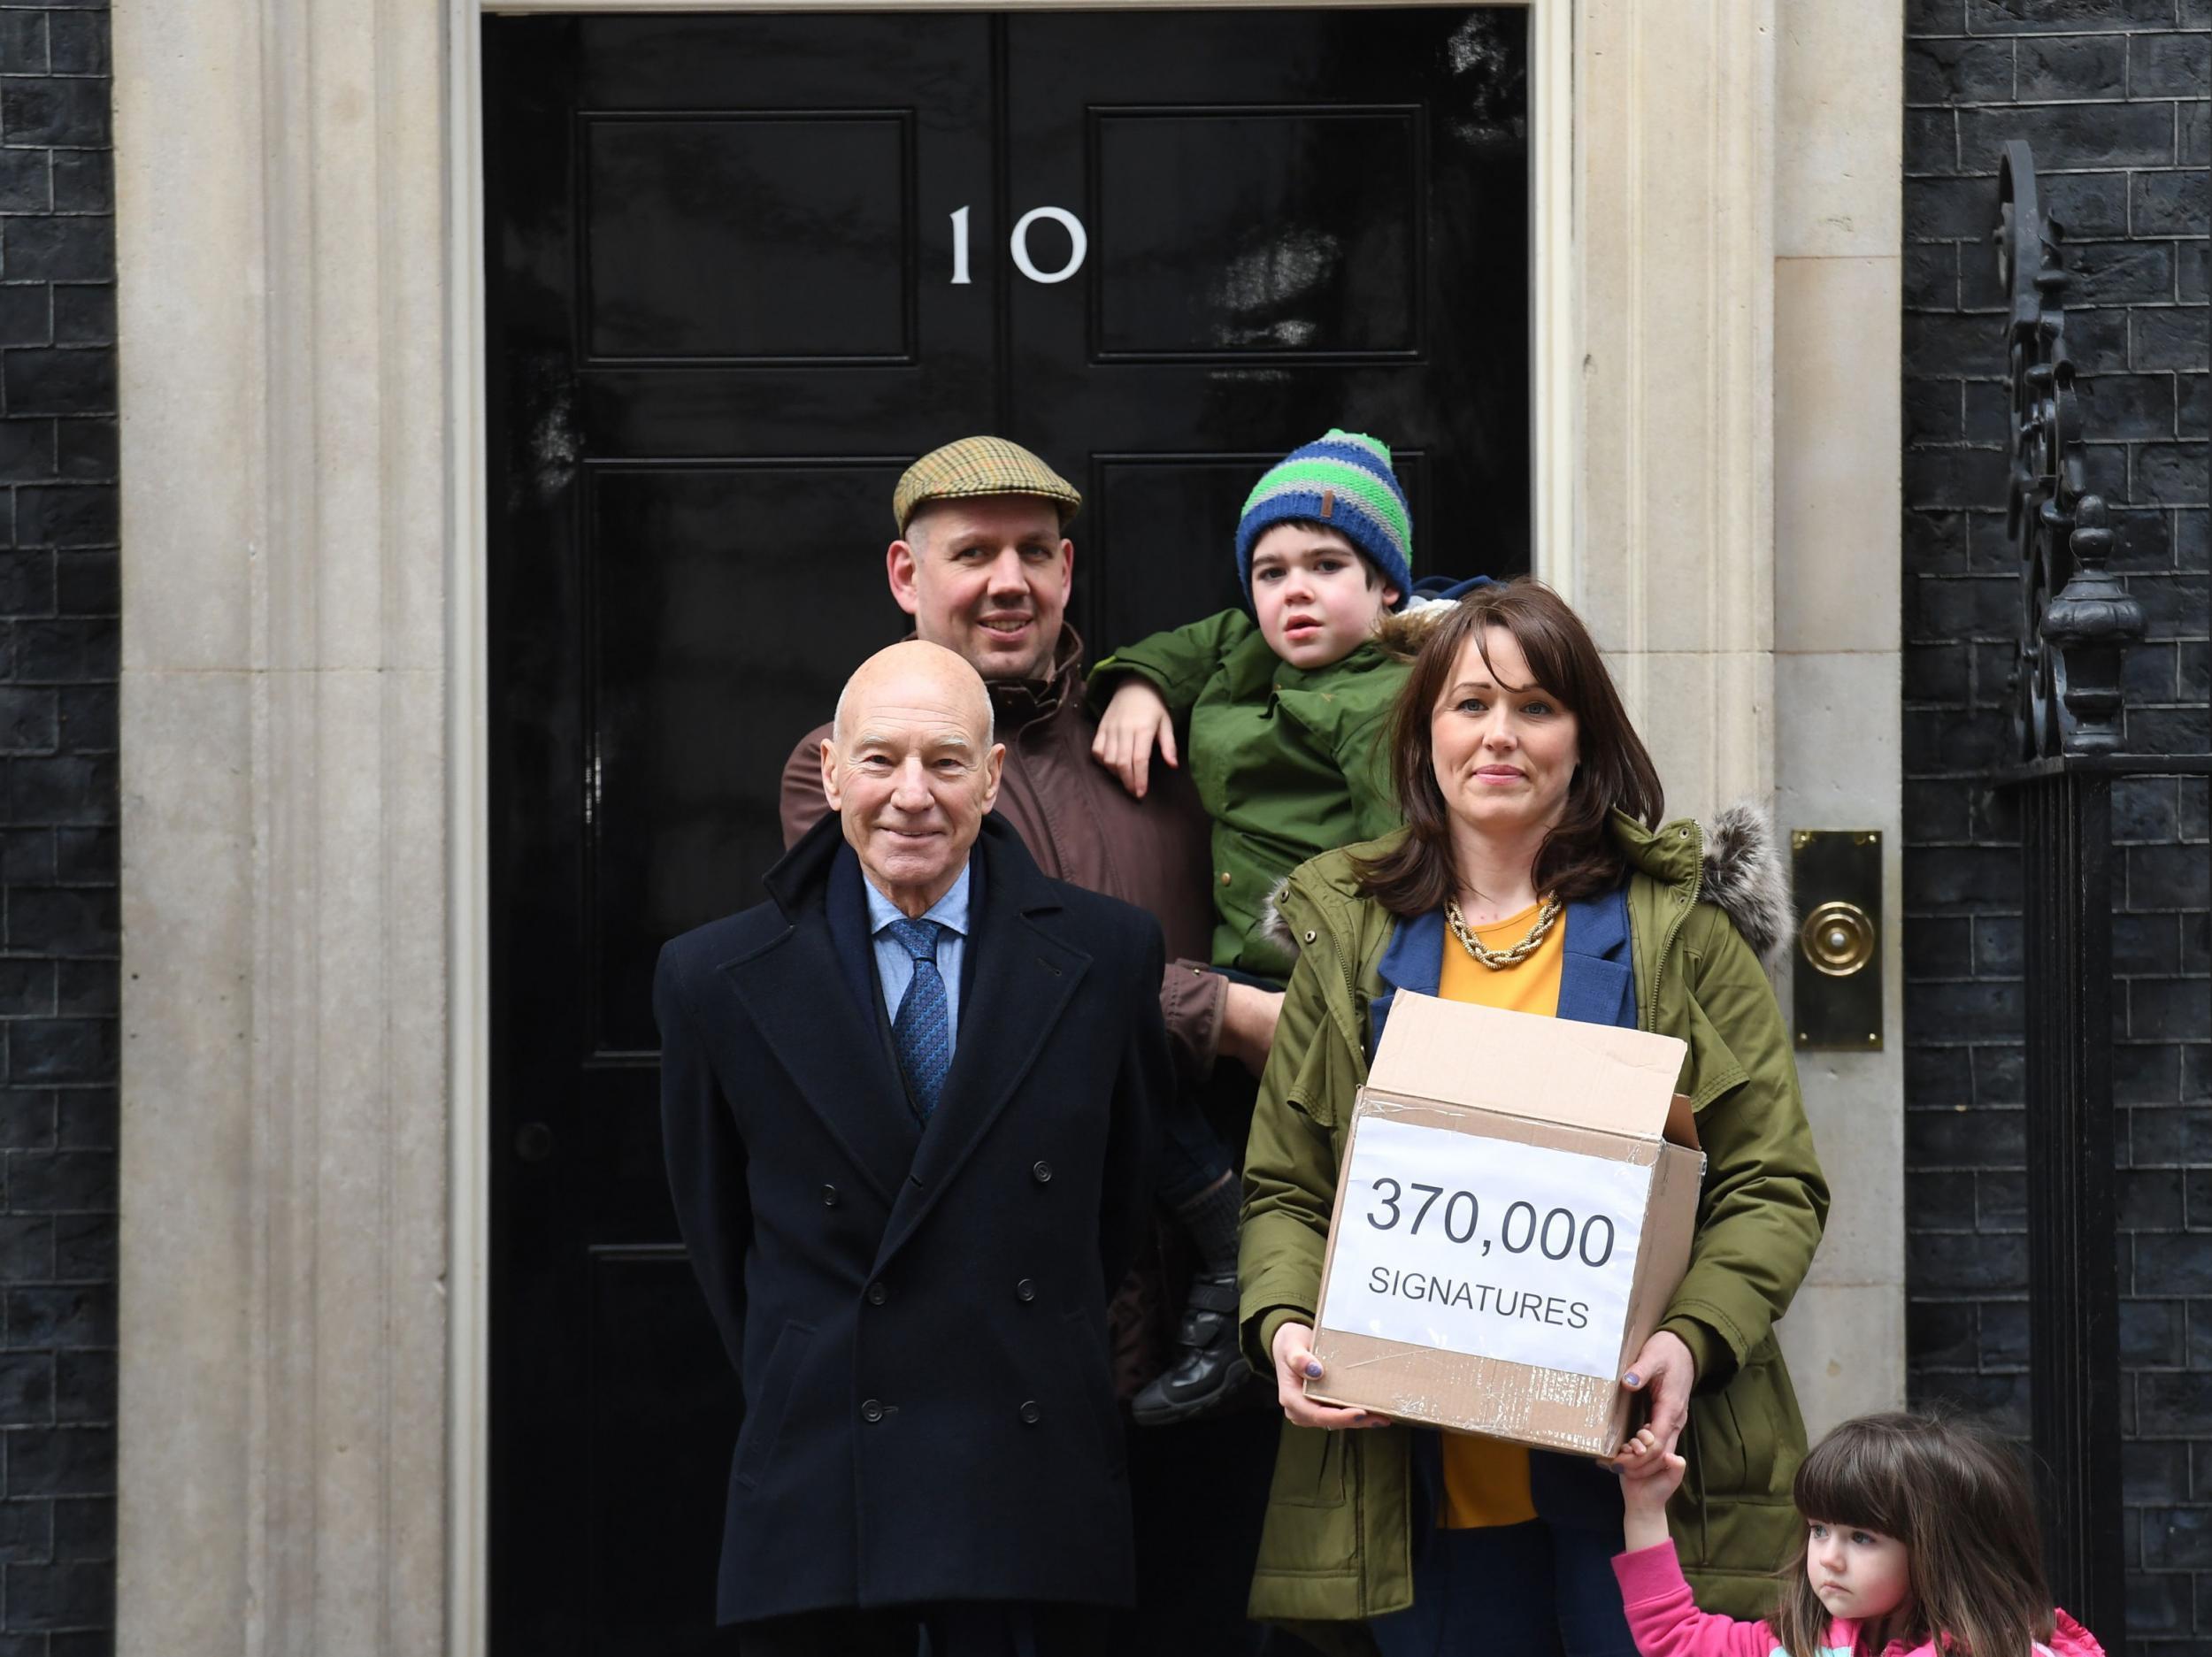 Six-year-old Alfie Dingley, his parents Drew Dingley and Hannah Deacon and actor Sir Patrick Stewart (left) walk up Whitehall in London before handing in a petition to Number 10 Downing Street asking for Alfie to be given medicinal cannabis to treat his epilepsy.